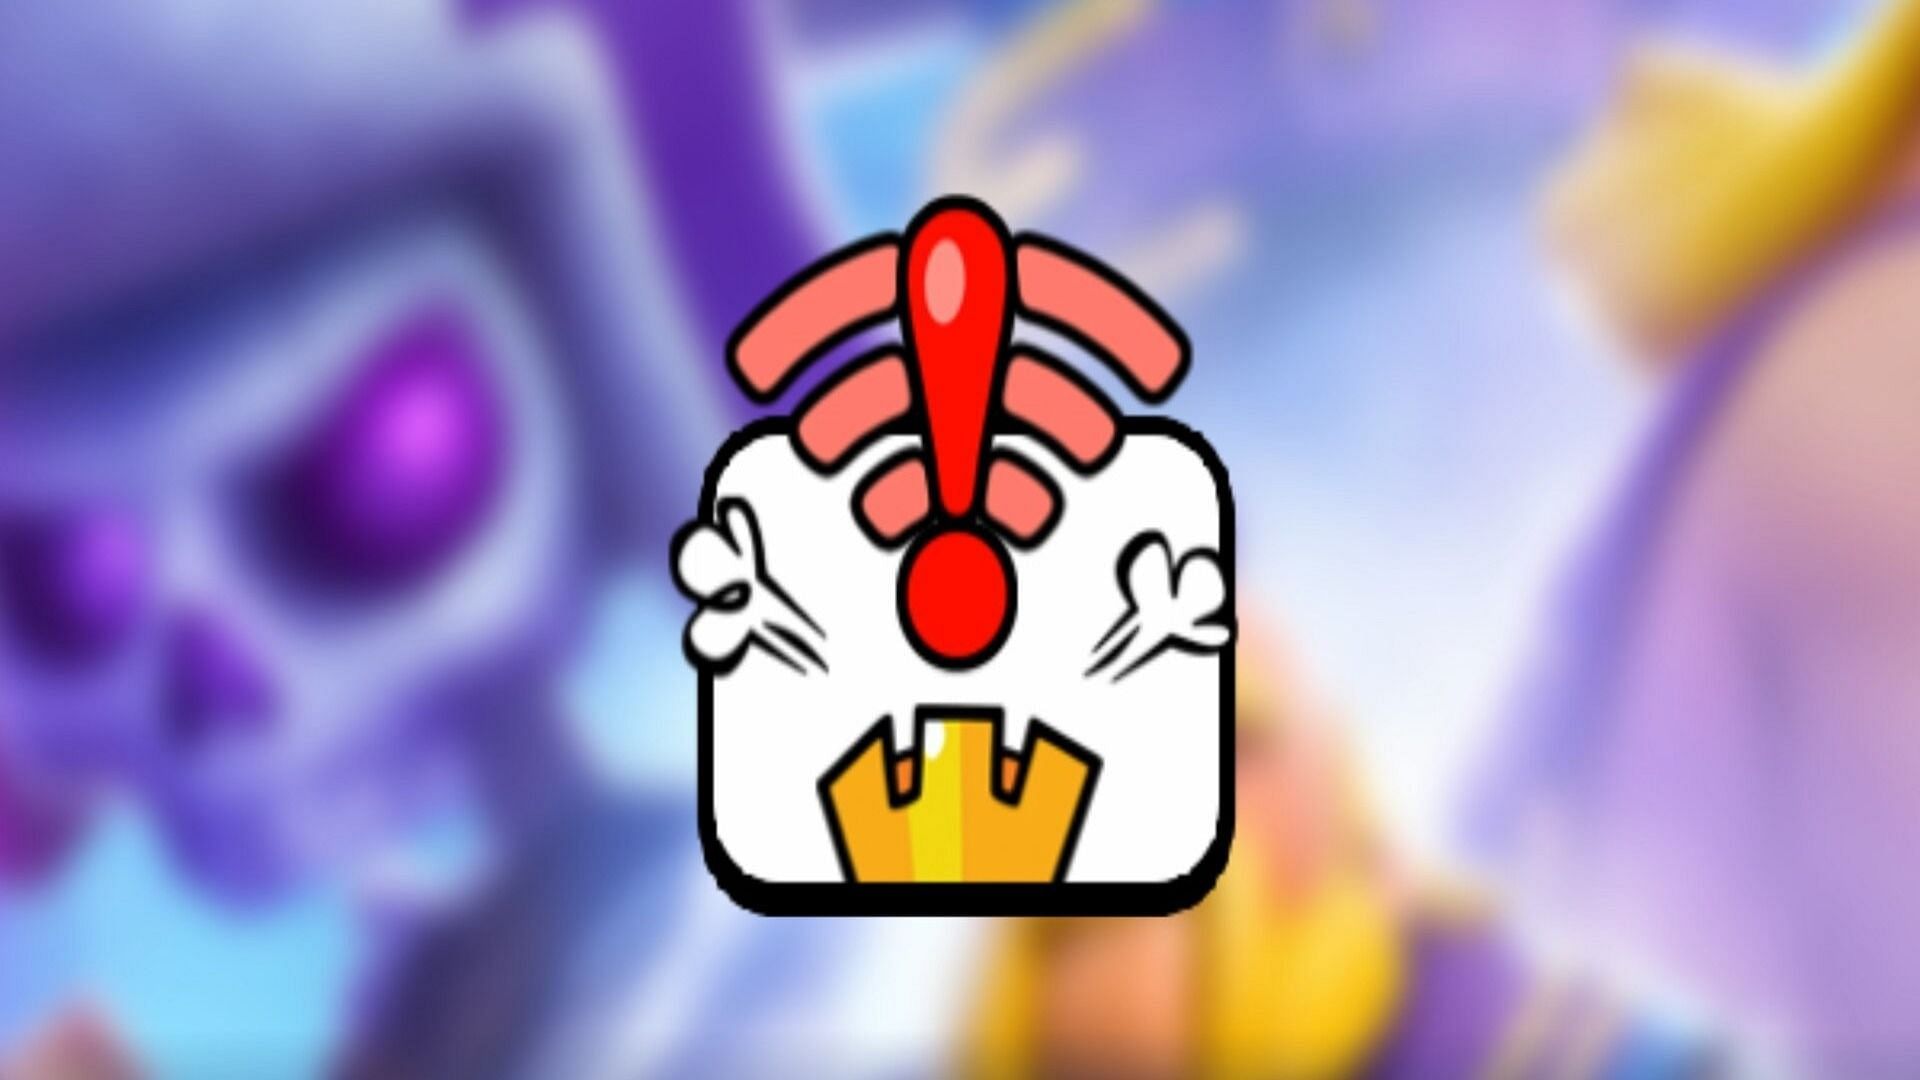 A new WiFi emote in the game (Image via Supercell/RoyalAPI)